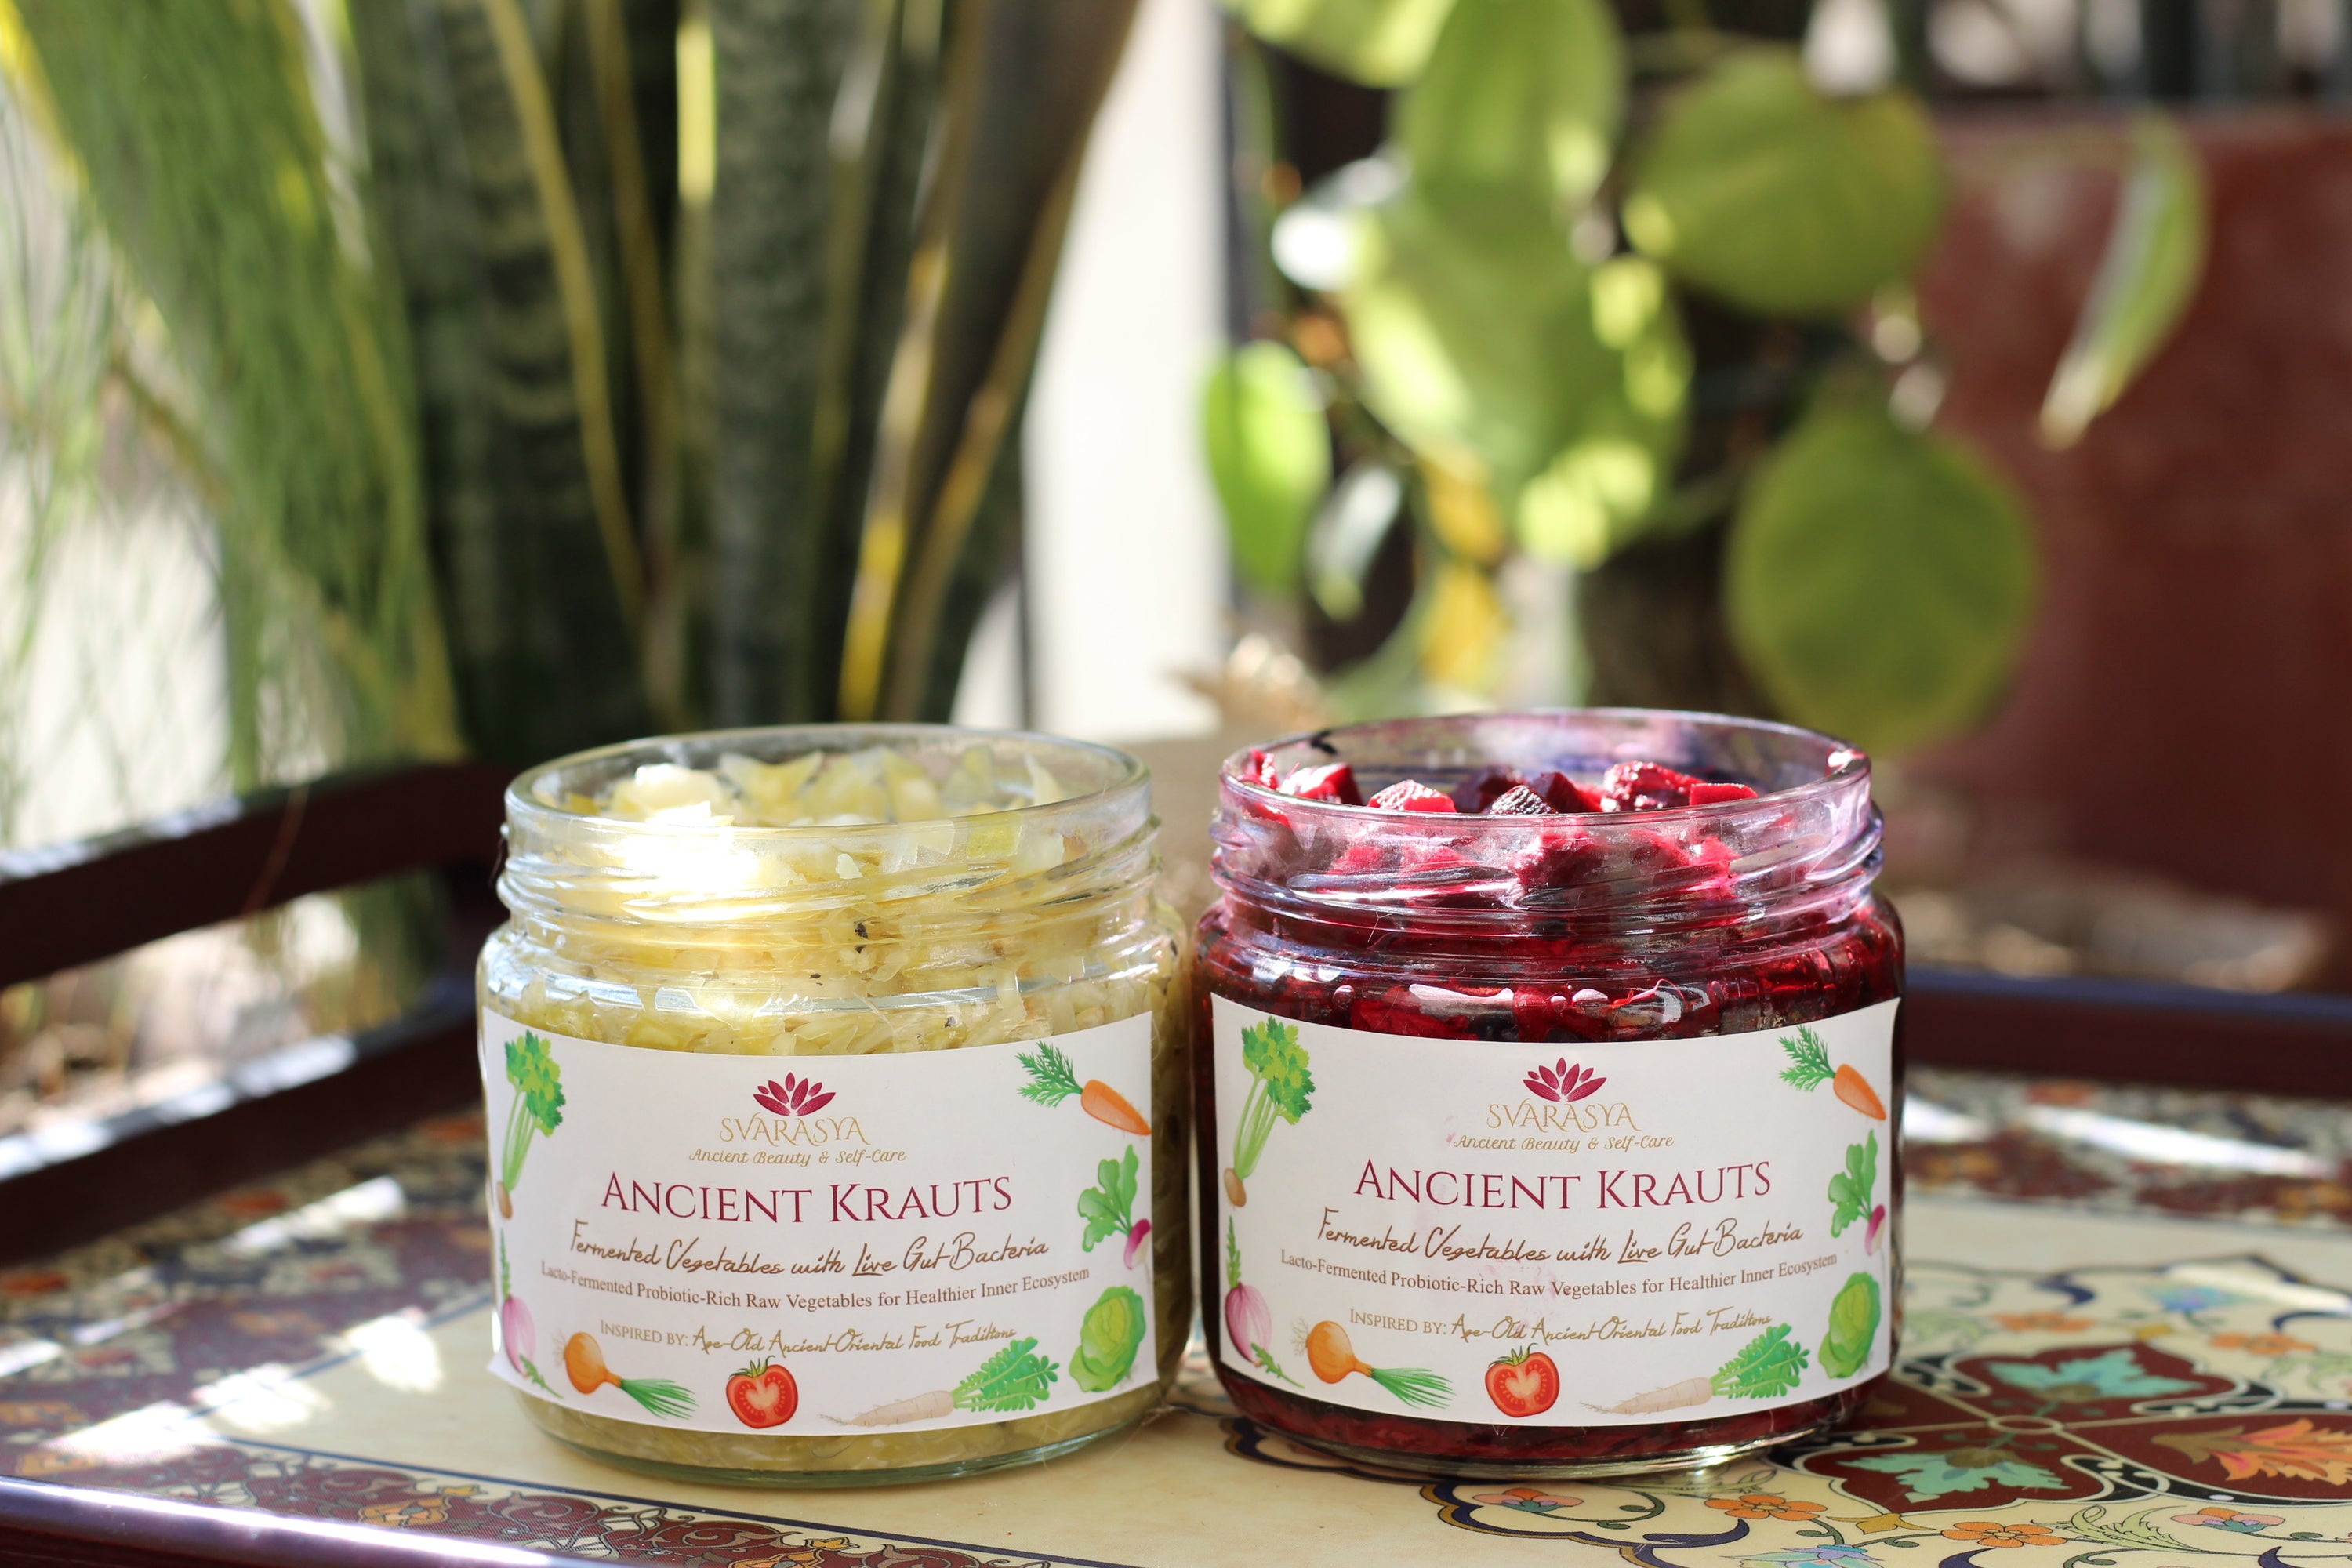 Svarasya's Ancient Krauts help optimize digestion by replacing the community of bad gut bacteria with good gut bacteria with regular consumption. The Ancient Krauts aid healthy digestion & strong immunity which is directly related to how we look & feel!